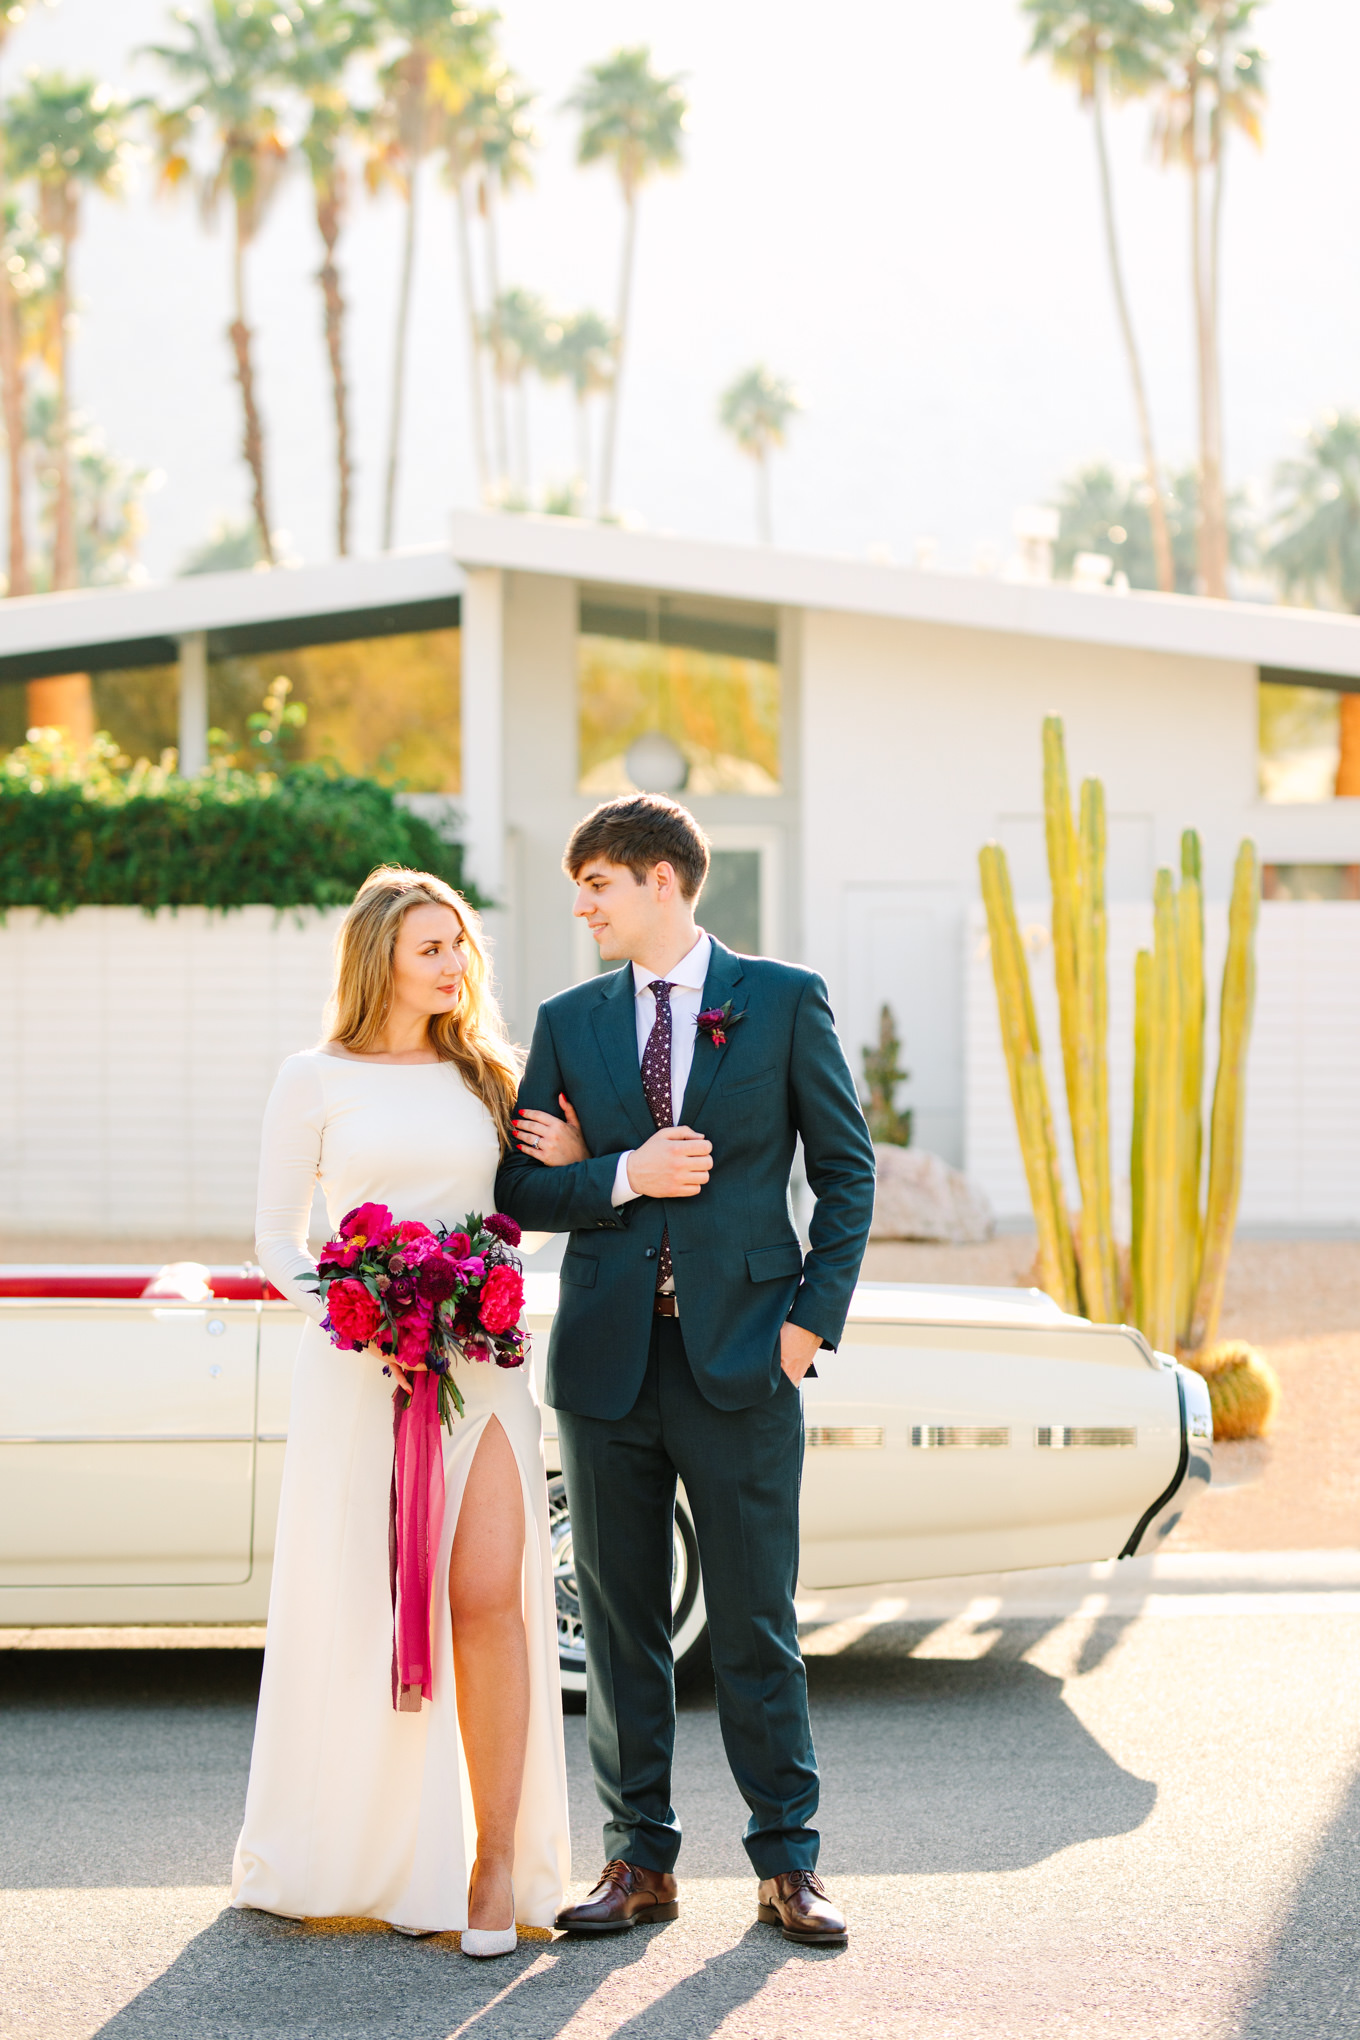 Bride and groom with classic car | Colorful jewel tone Palm Springs elopement | Fresh and colorful photography for fun-loving couples in Southern California | #colorfulelopement #palmspringselopement #elopementphotography #palmspringswedding Source: Mary Costa Photography | Los Angeles